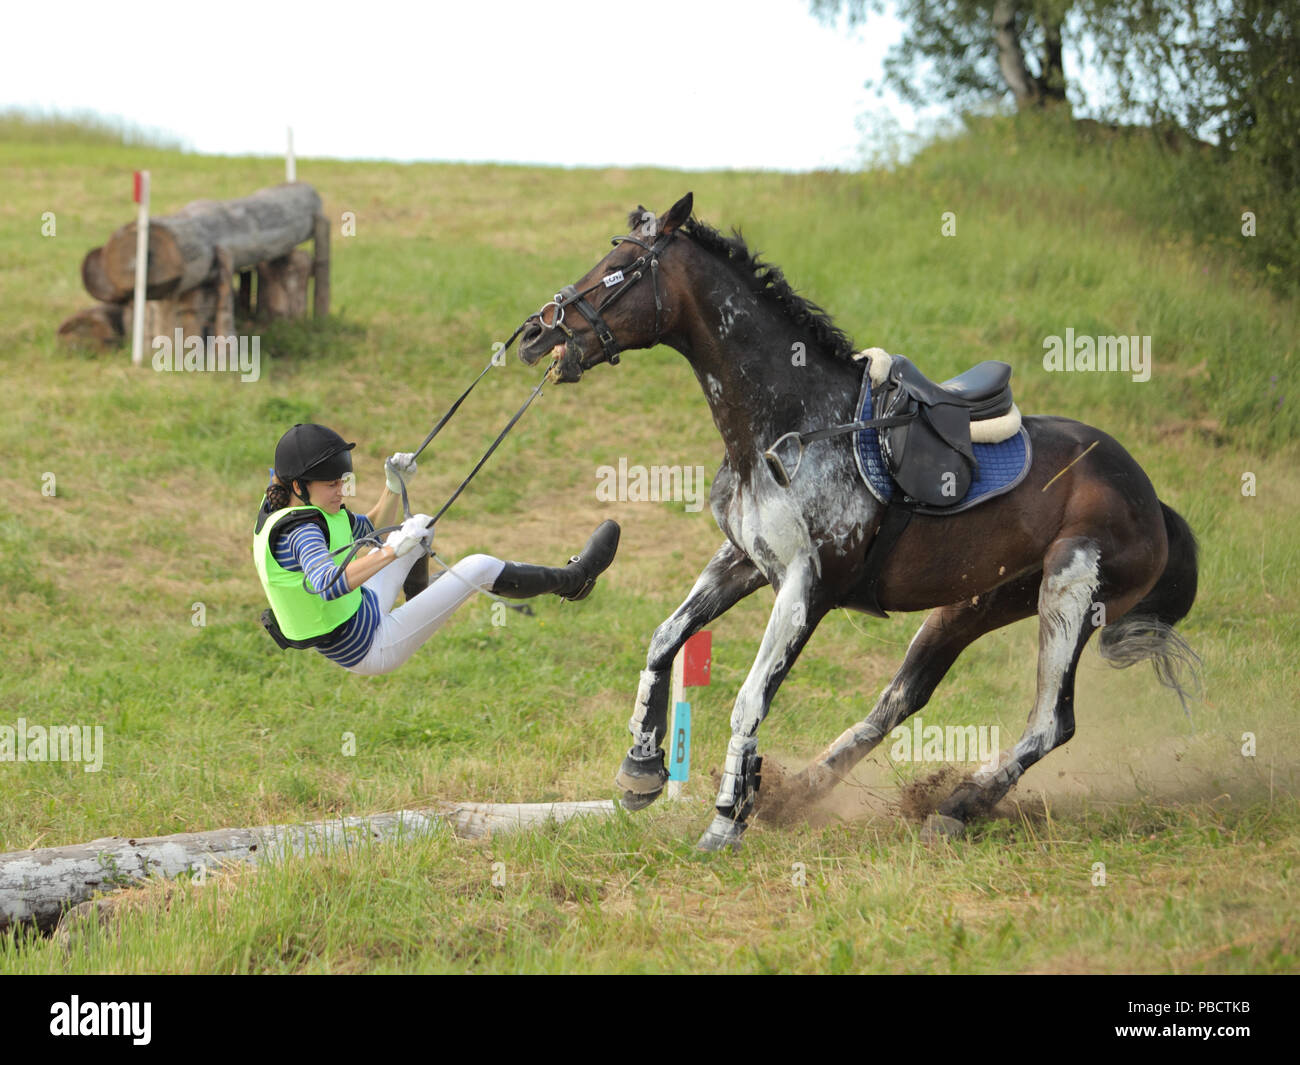 Young rider falling from horse during a competition Stock Photo